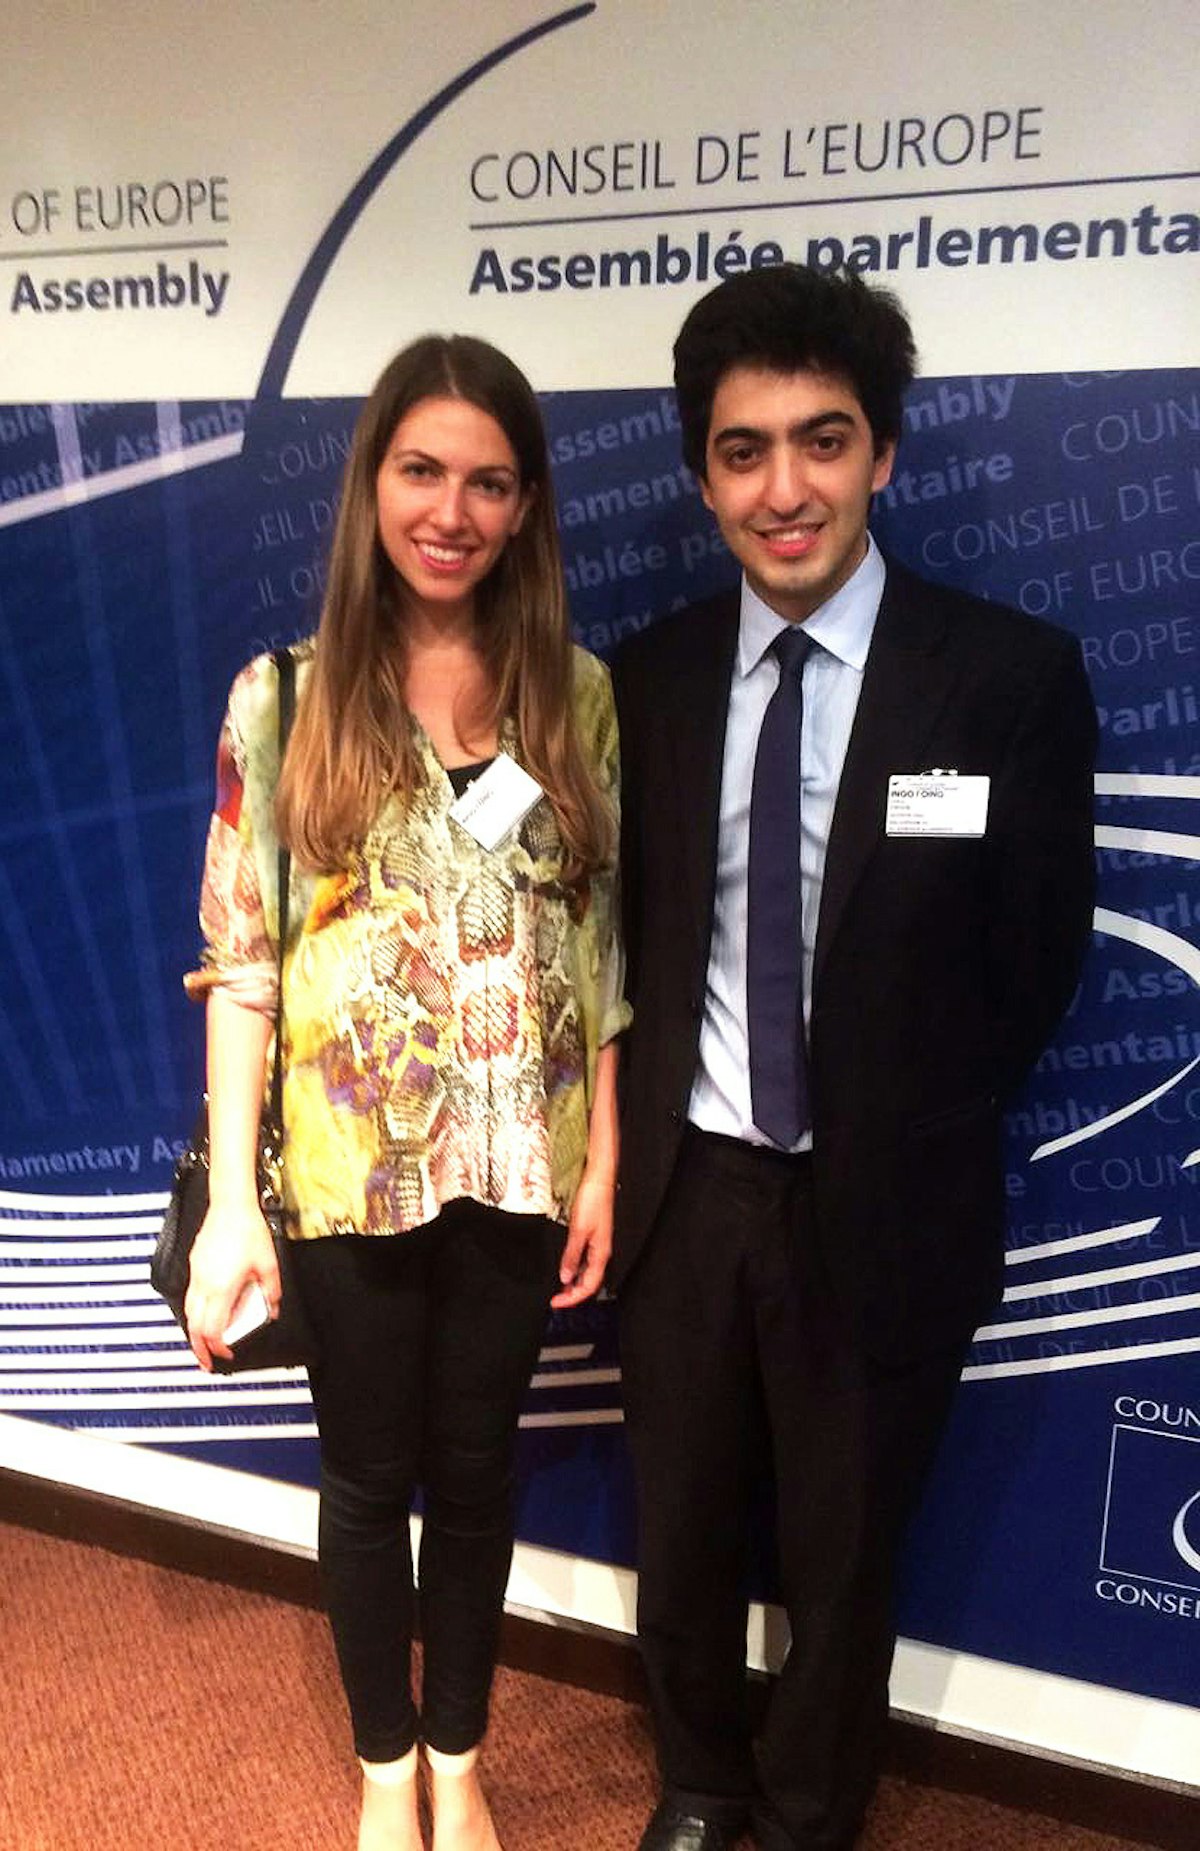 BIC representatives Tala Ram (left) and Collis Tahzib (right) at the Council of Europe Conference of International NGOS in Strasbourg.